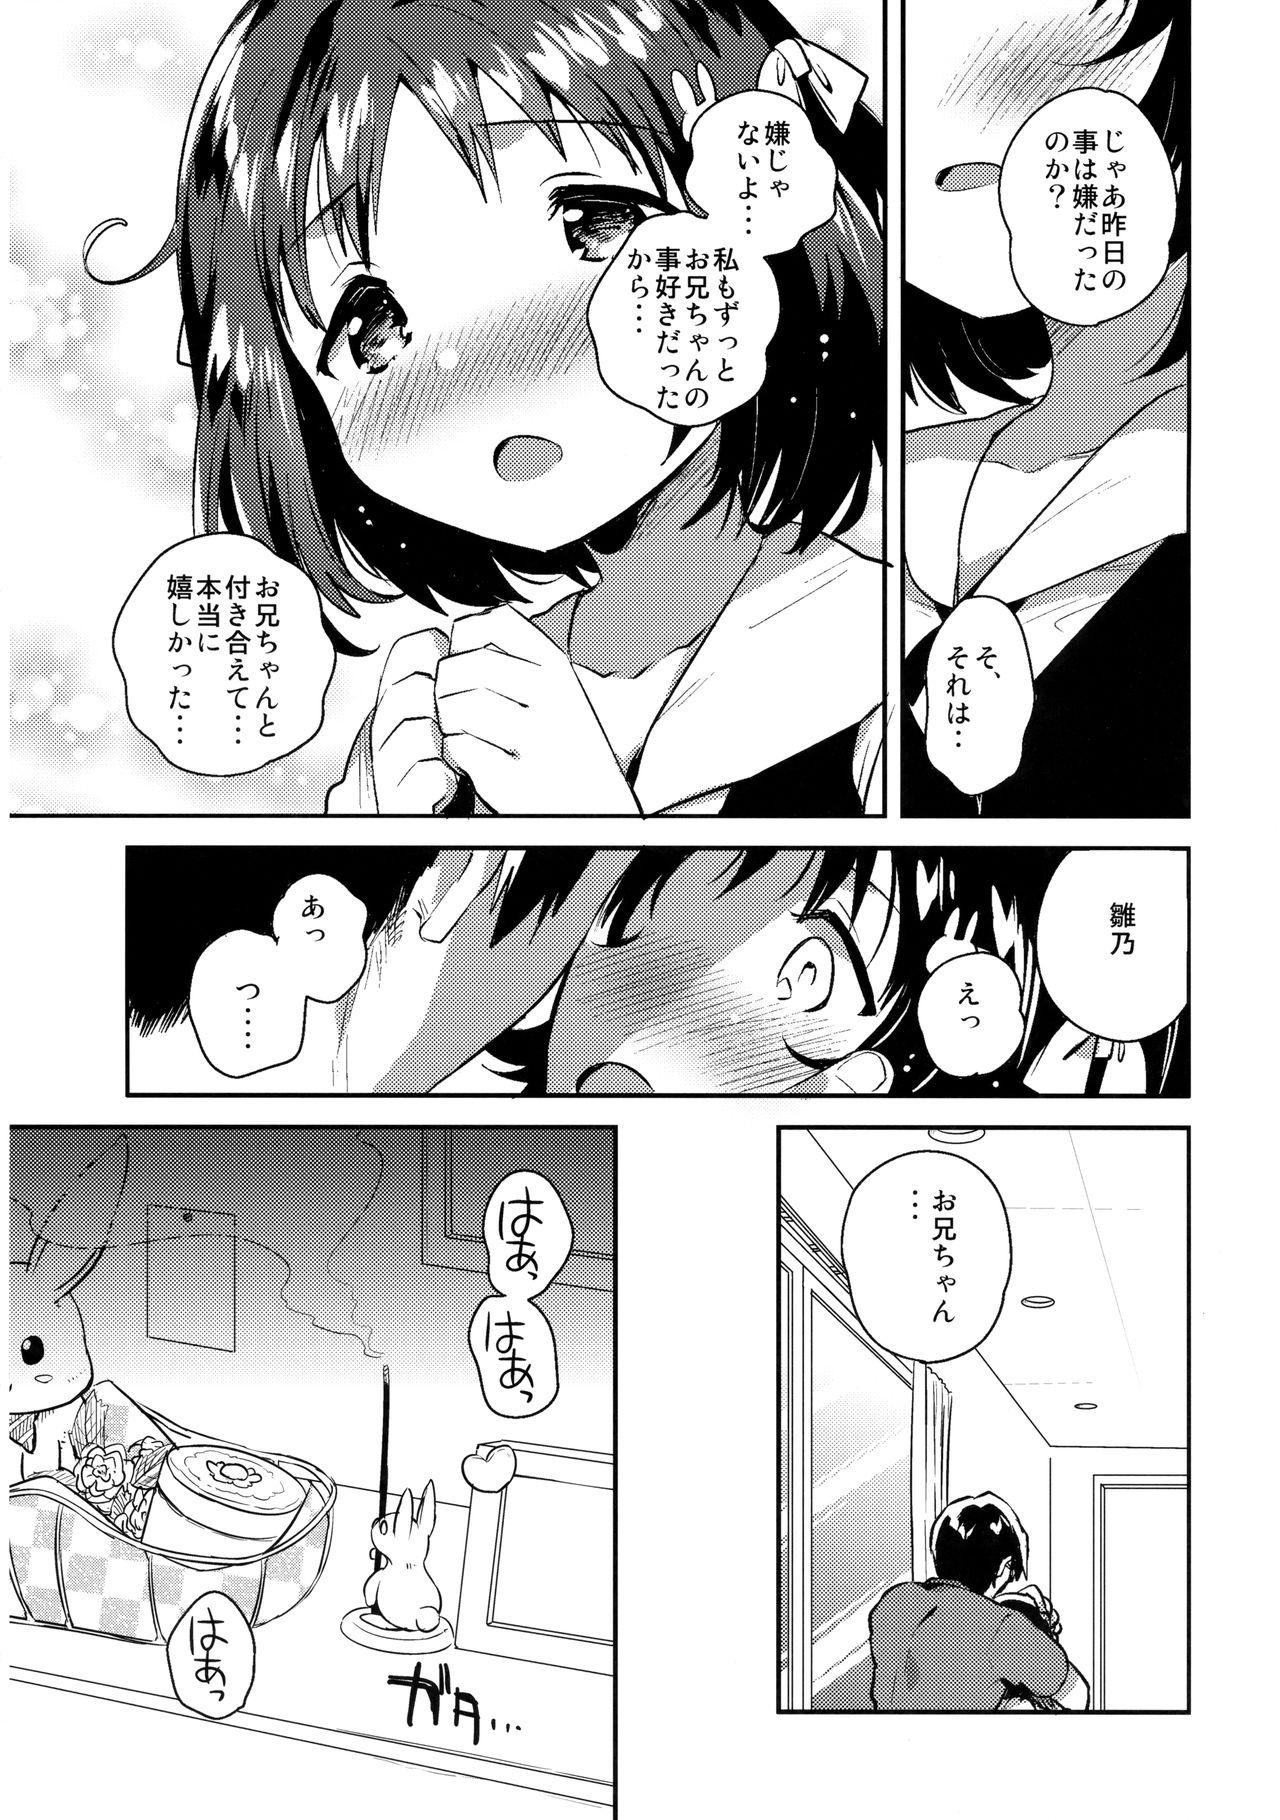 Behind Imouto wa Boku o Futta - My sister ditched me. - Original Pounded - Page 7